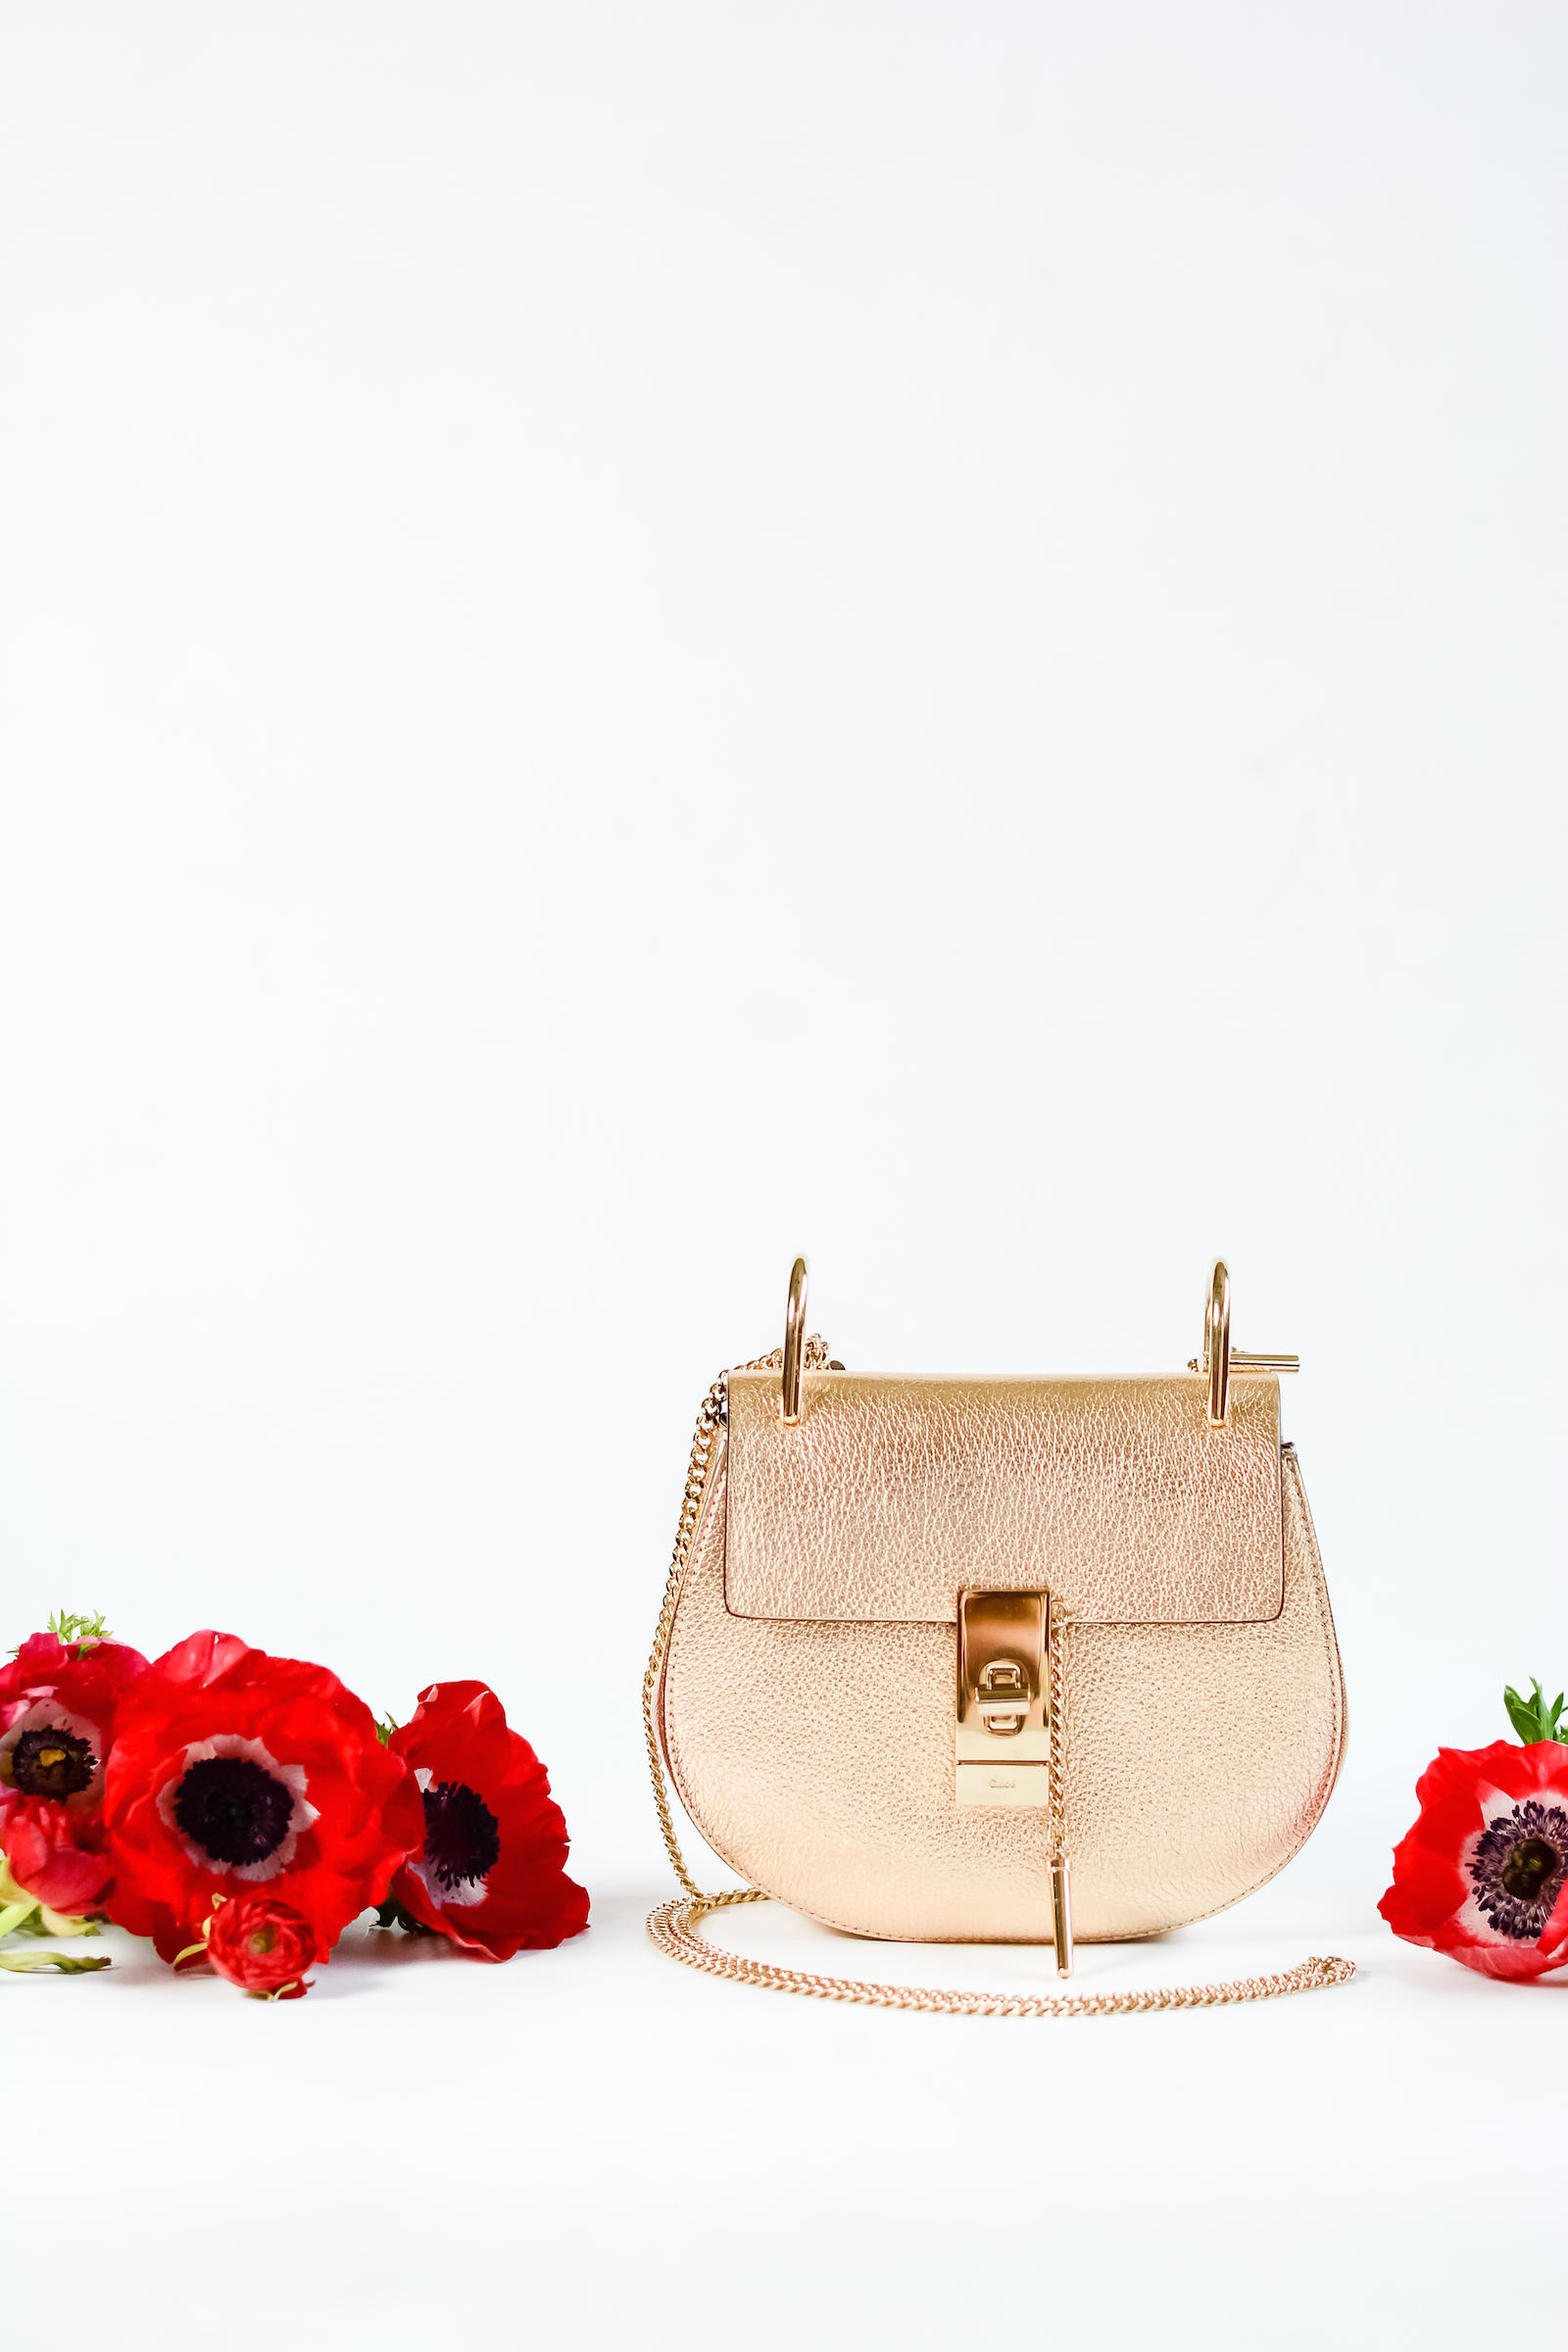 The Look for Less: Chloe 'Drew' Shoulder Bag - The Budget Babe